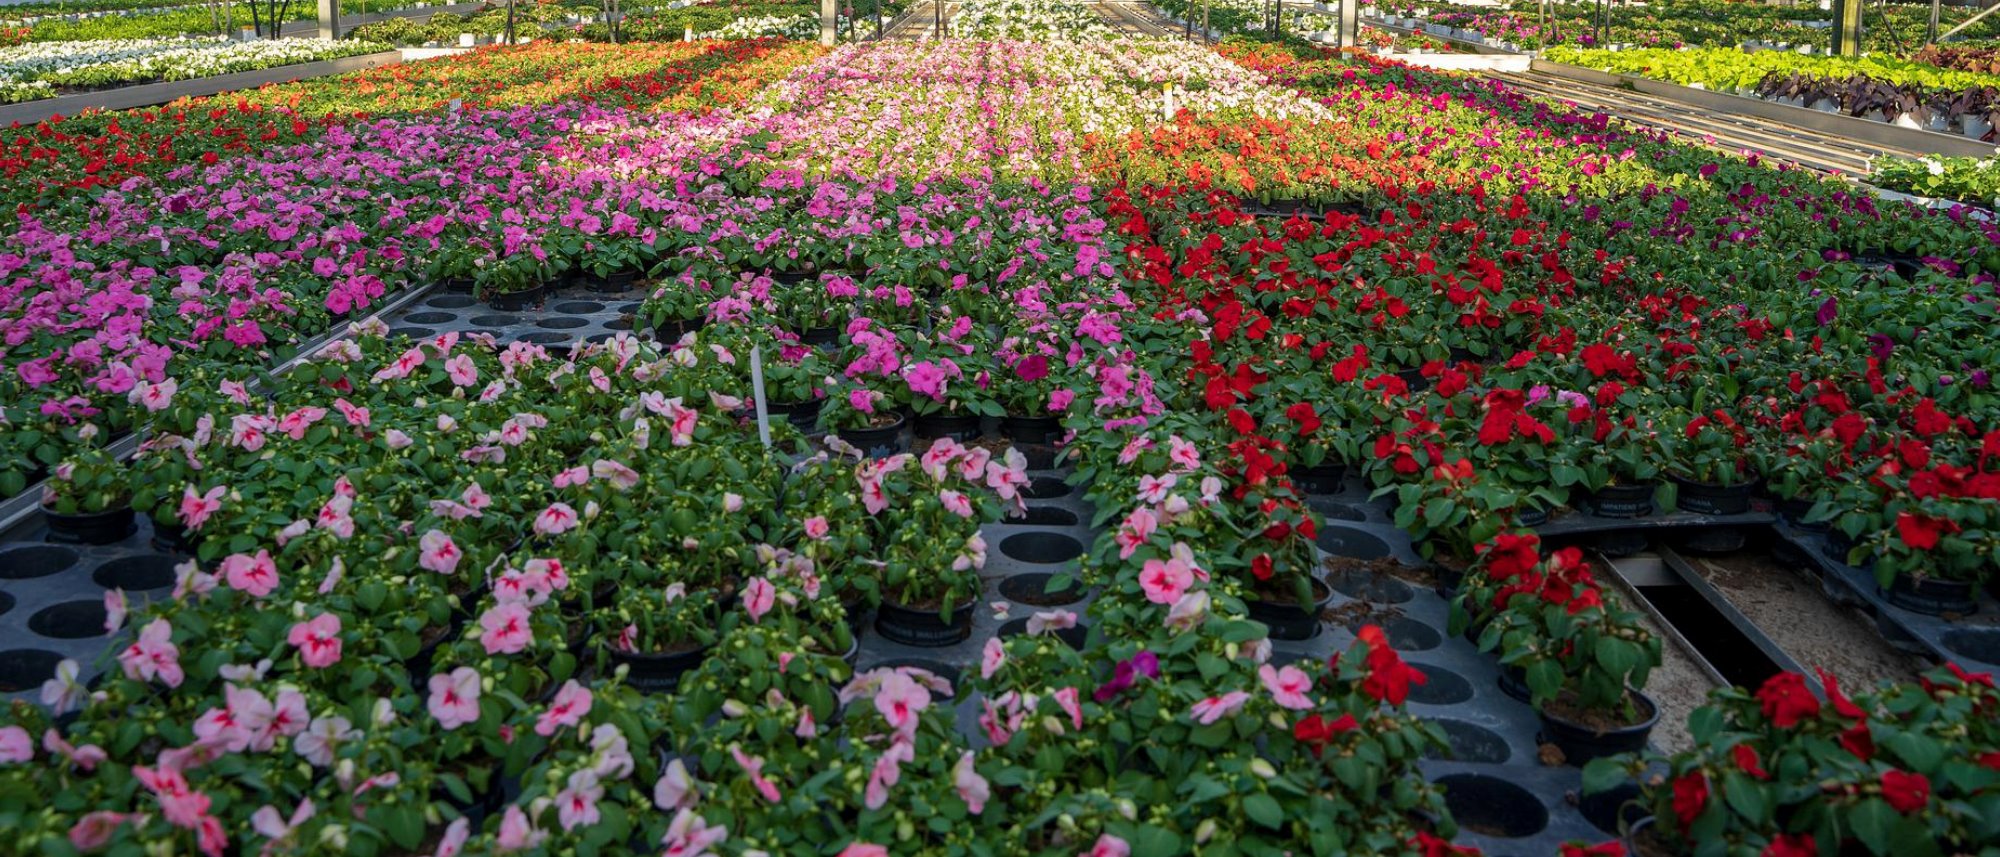 Category image for collections of flower seeds showing a flower farm in a greenhouse